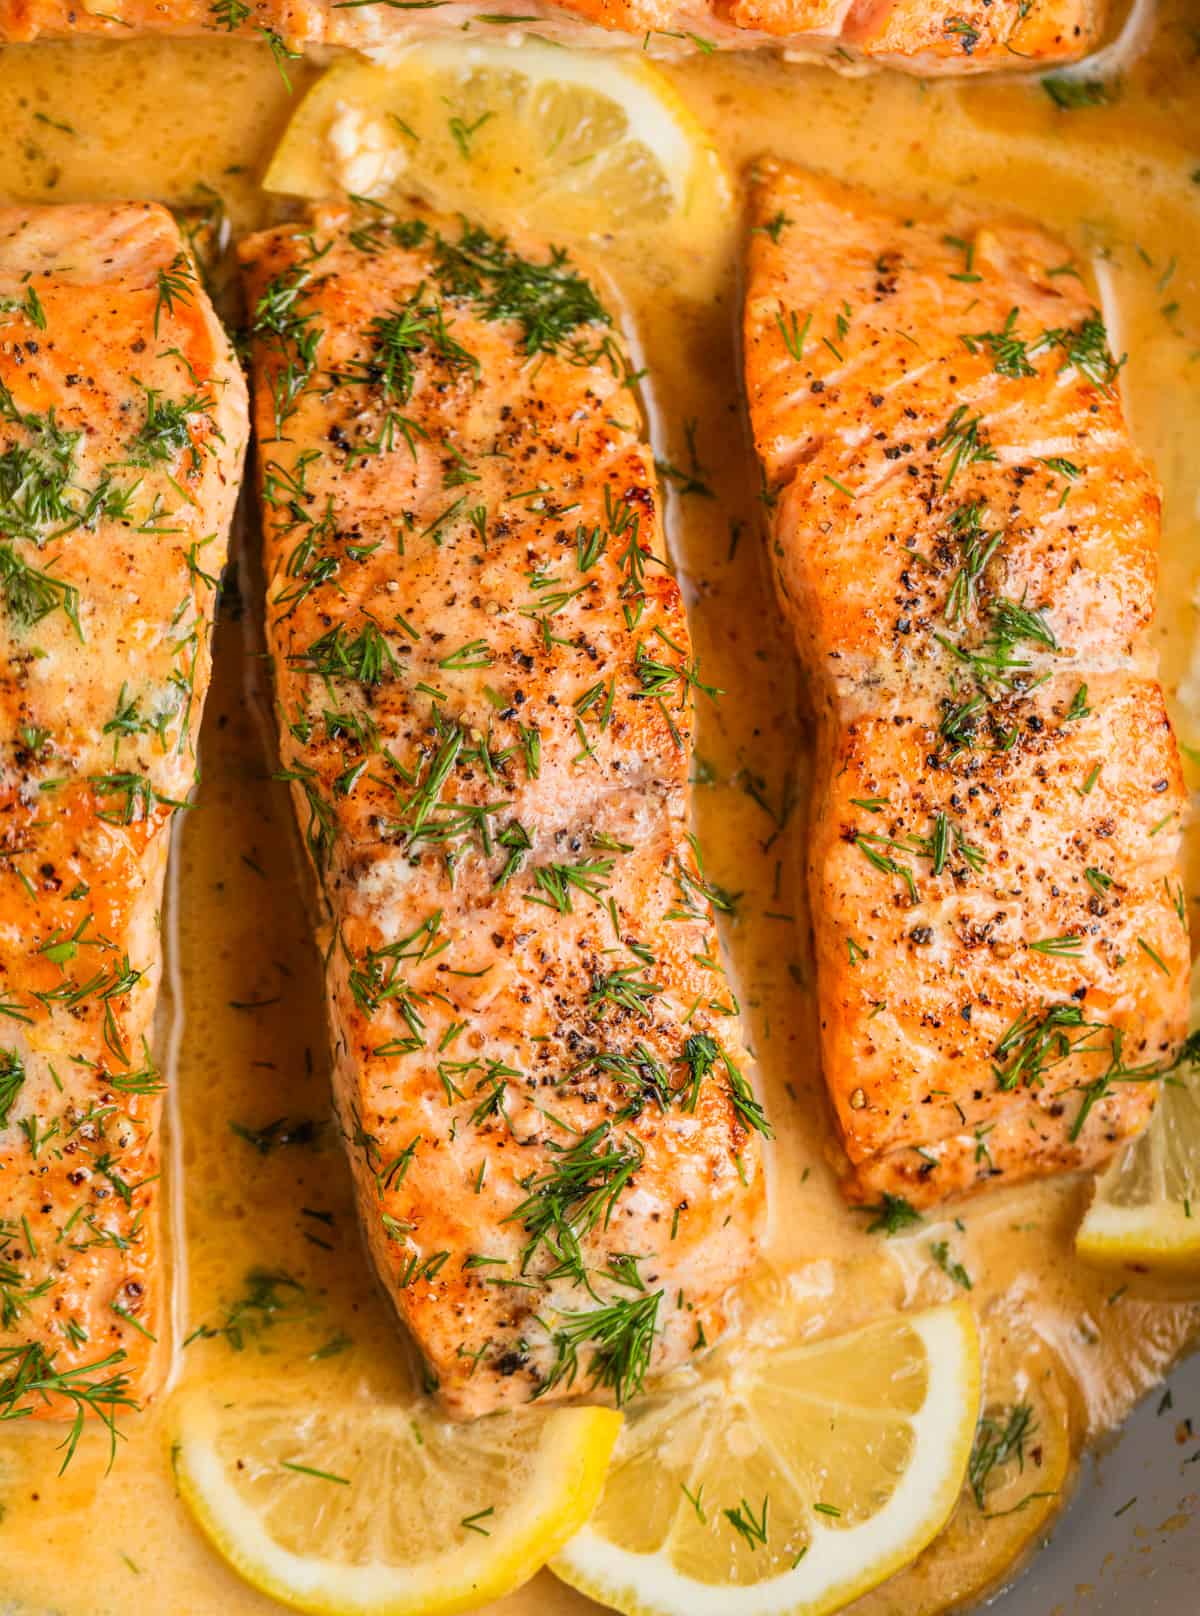 Overhead view of pan seared salmon fillets topped with fresh dill and lemon slices in pan.